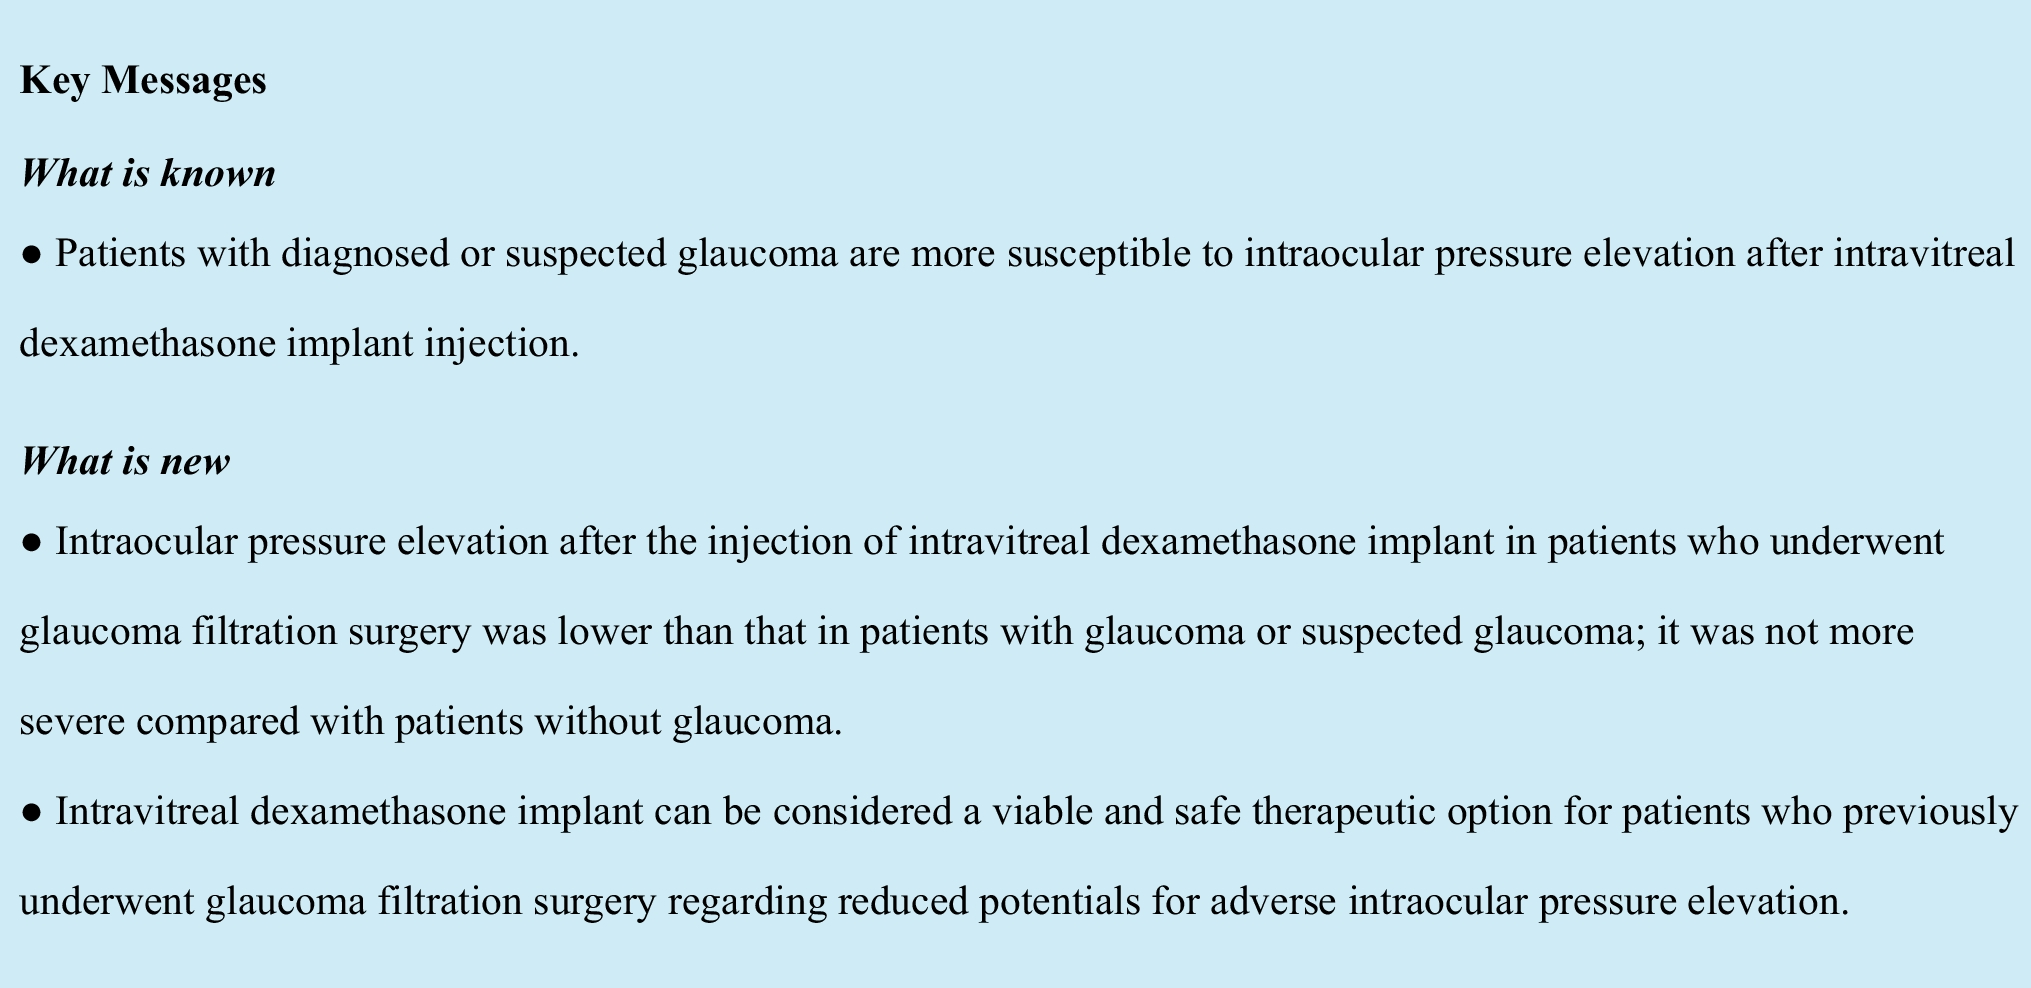 Changes in intraocular pressure following intravitreal dexamethasone implant in patients with history of glaucoma filtration surgery